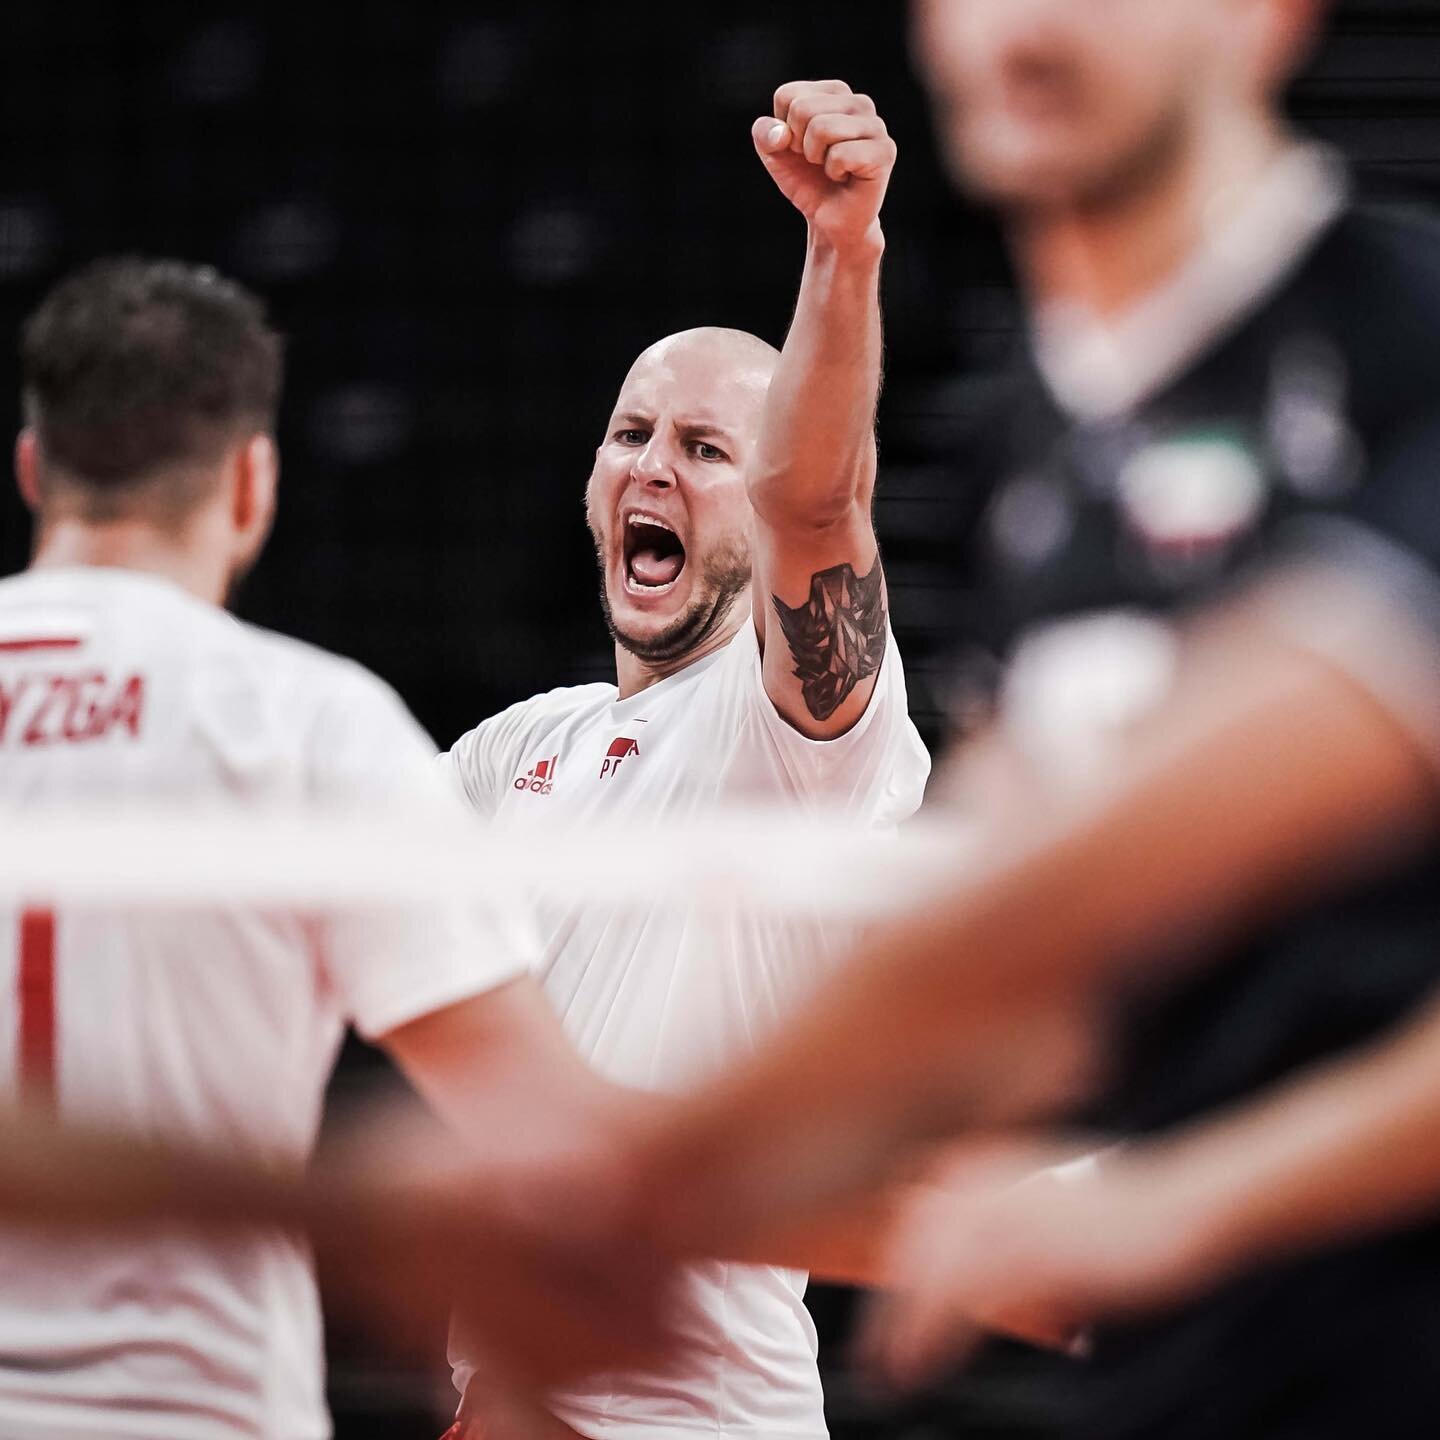 It is Friday, and we celebrate the upcoming weekend with guest #4 🍿 @bartkurek88 is perhaps the biggest star of Polish volleyball, and you can get to know more about Bartosz below 👇🏼 Now it is only #3 days left until we launch Sideout Volleycast..